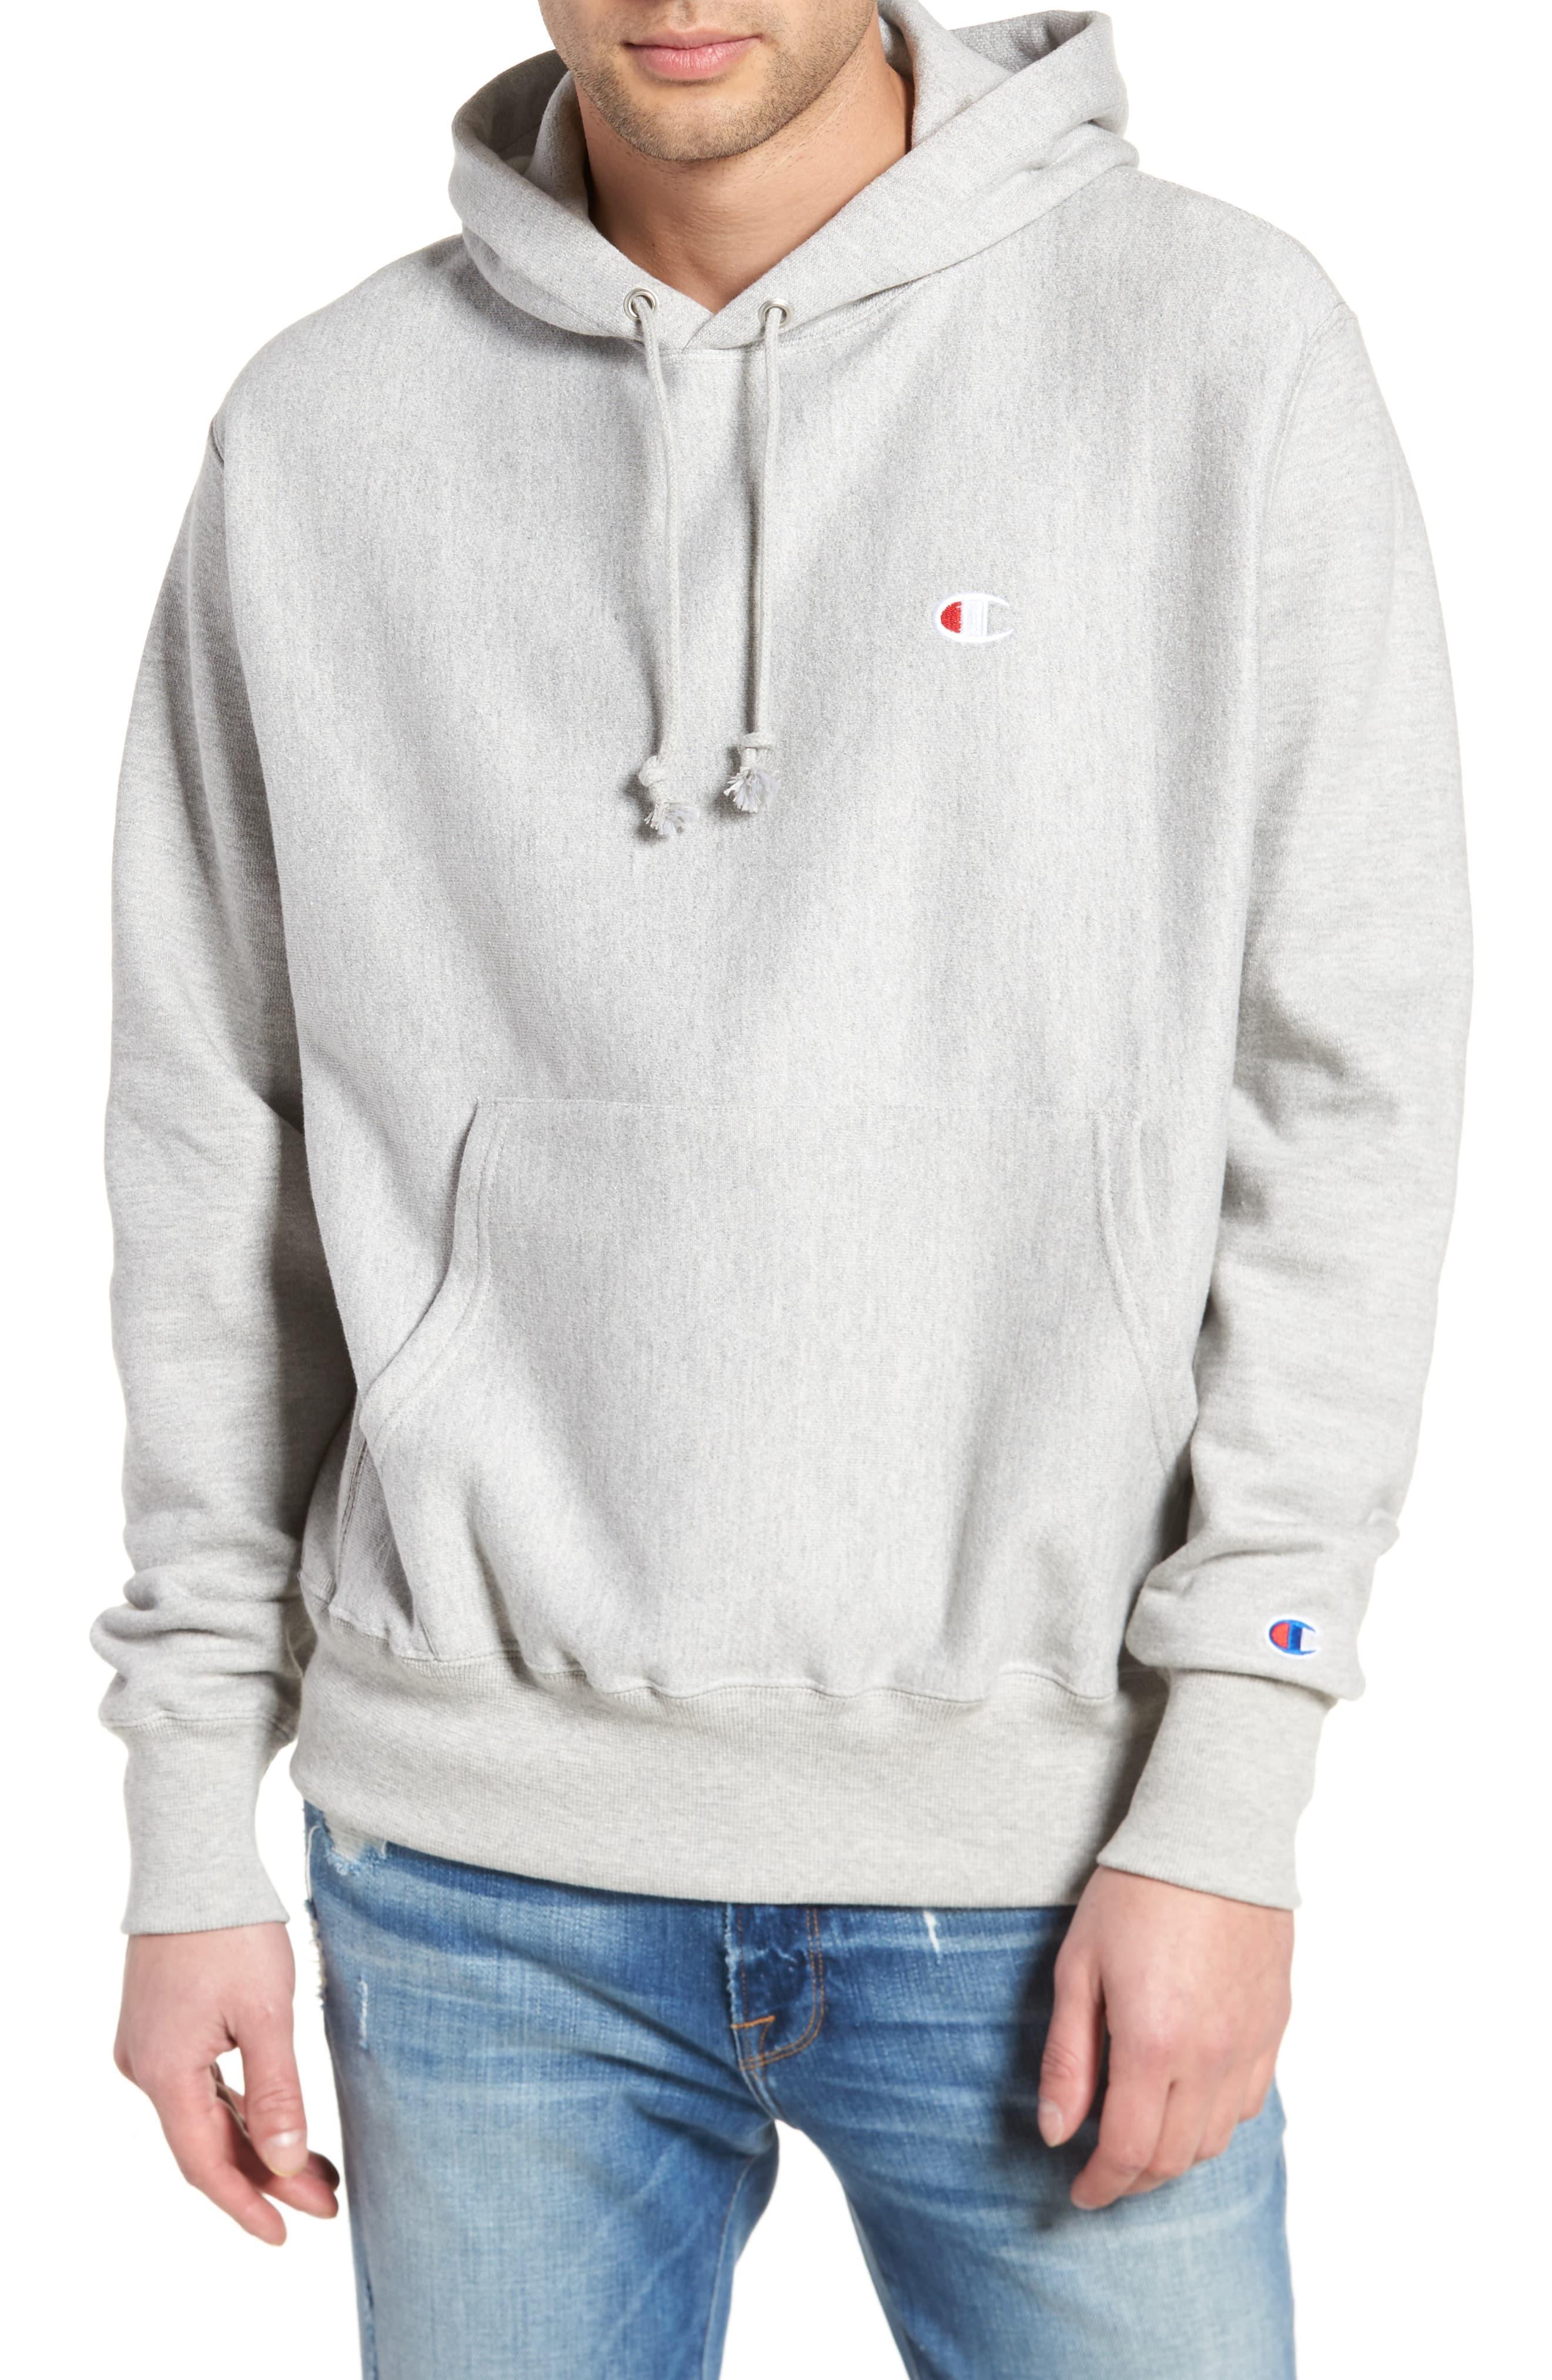 Champion Reverse Weave Pullover Hoodie in Gray for Men - Save 17% - Lyst